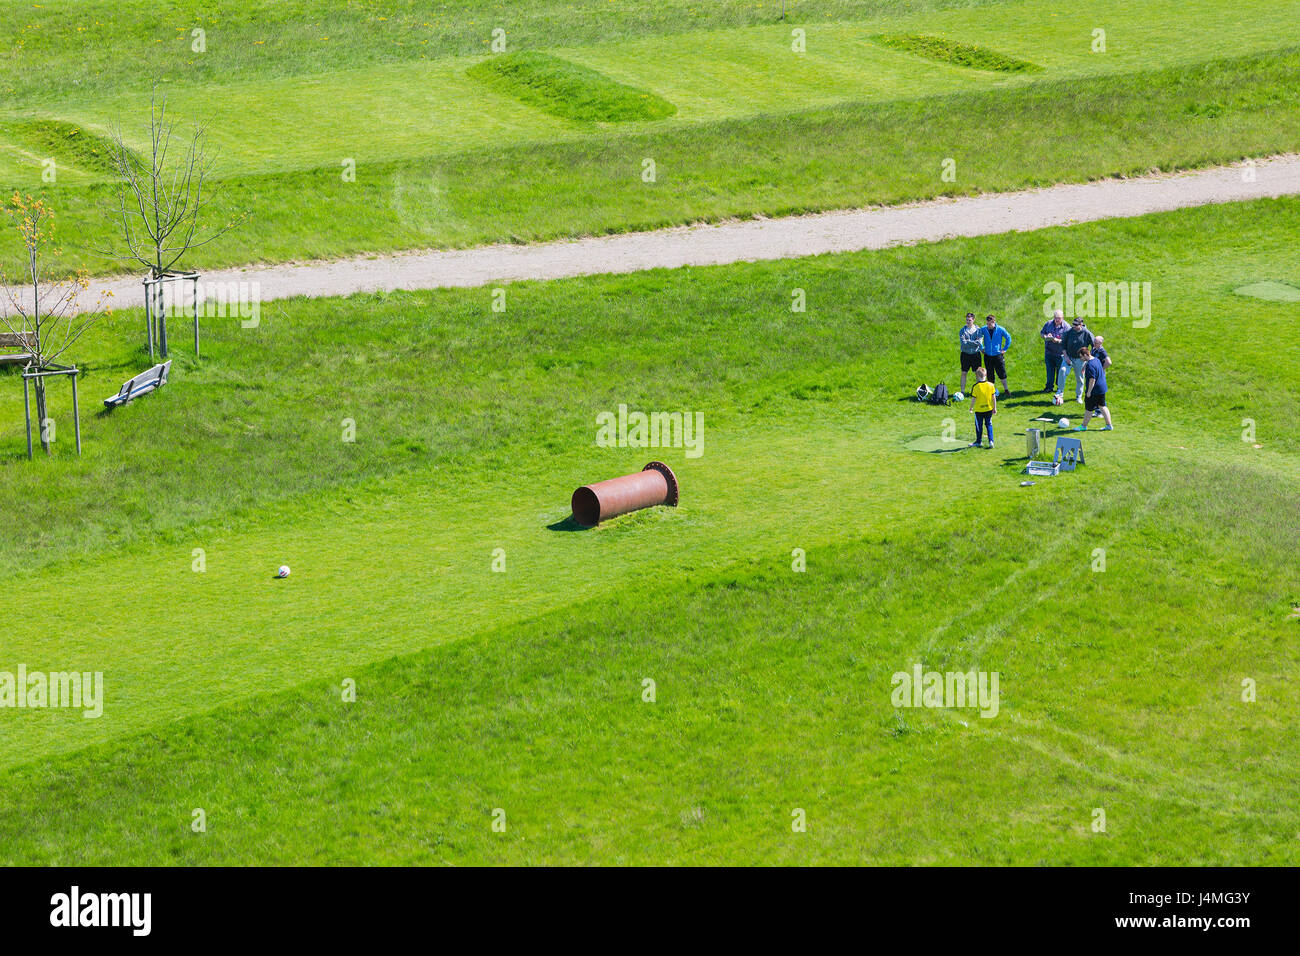 INDEN - MAY 5: Aerial view of a small group of people playing soccer golf on a green lawn on May 5, 2016. Stock Photo